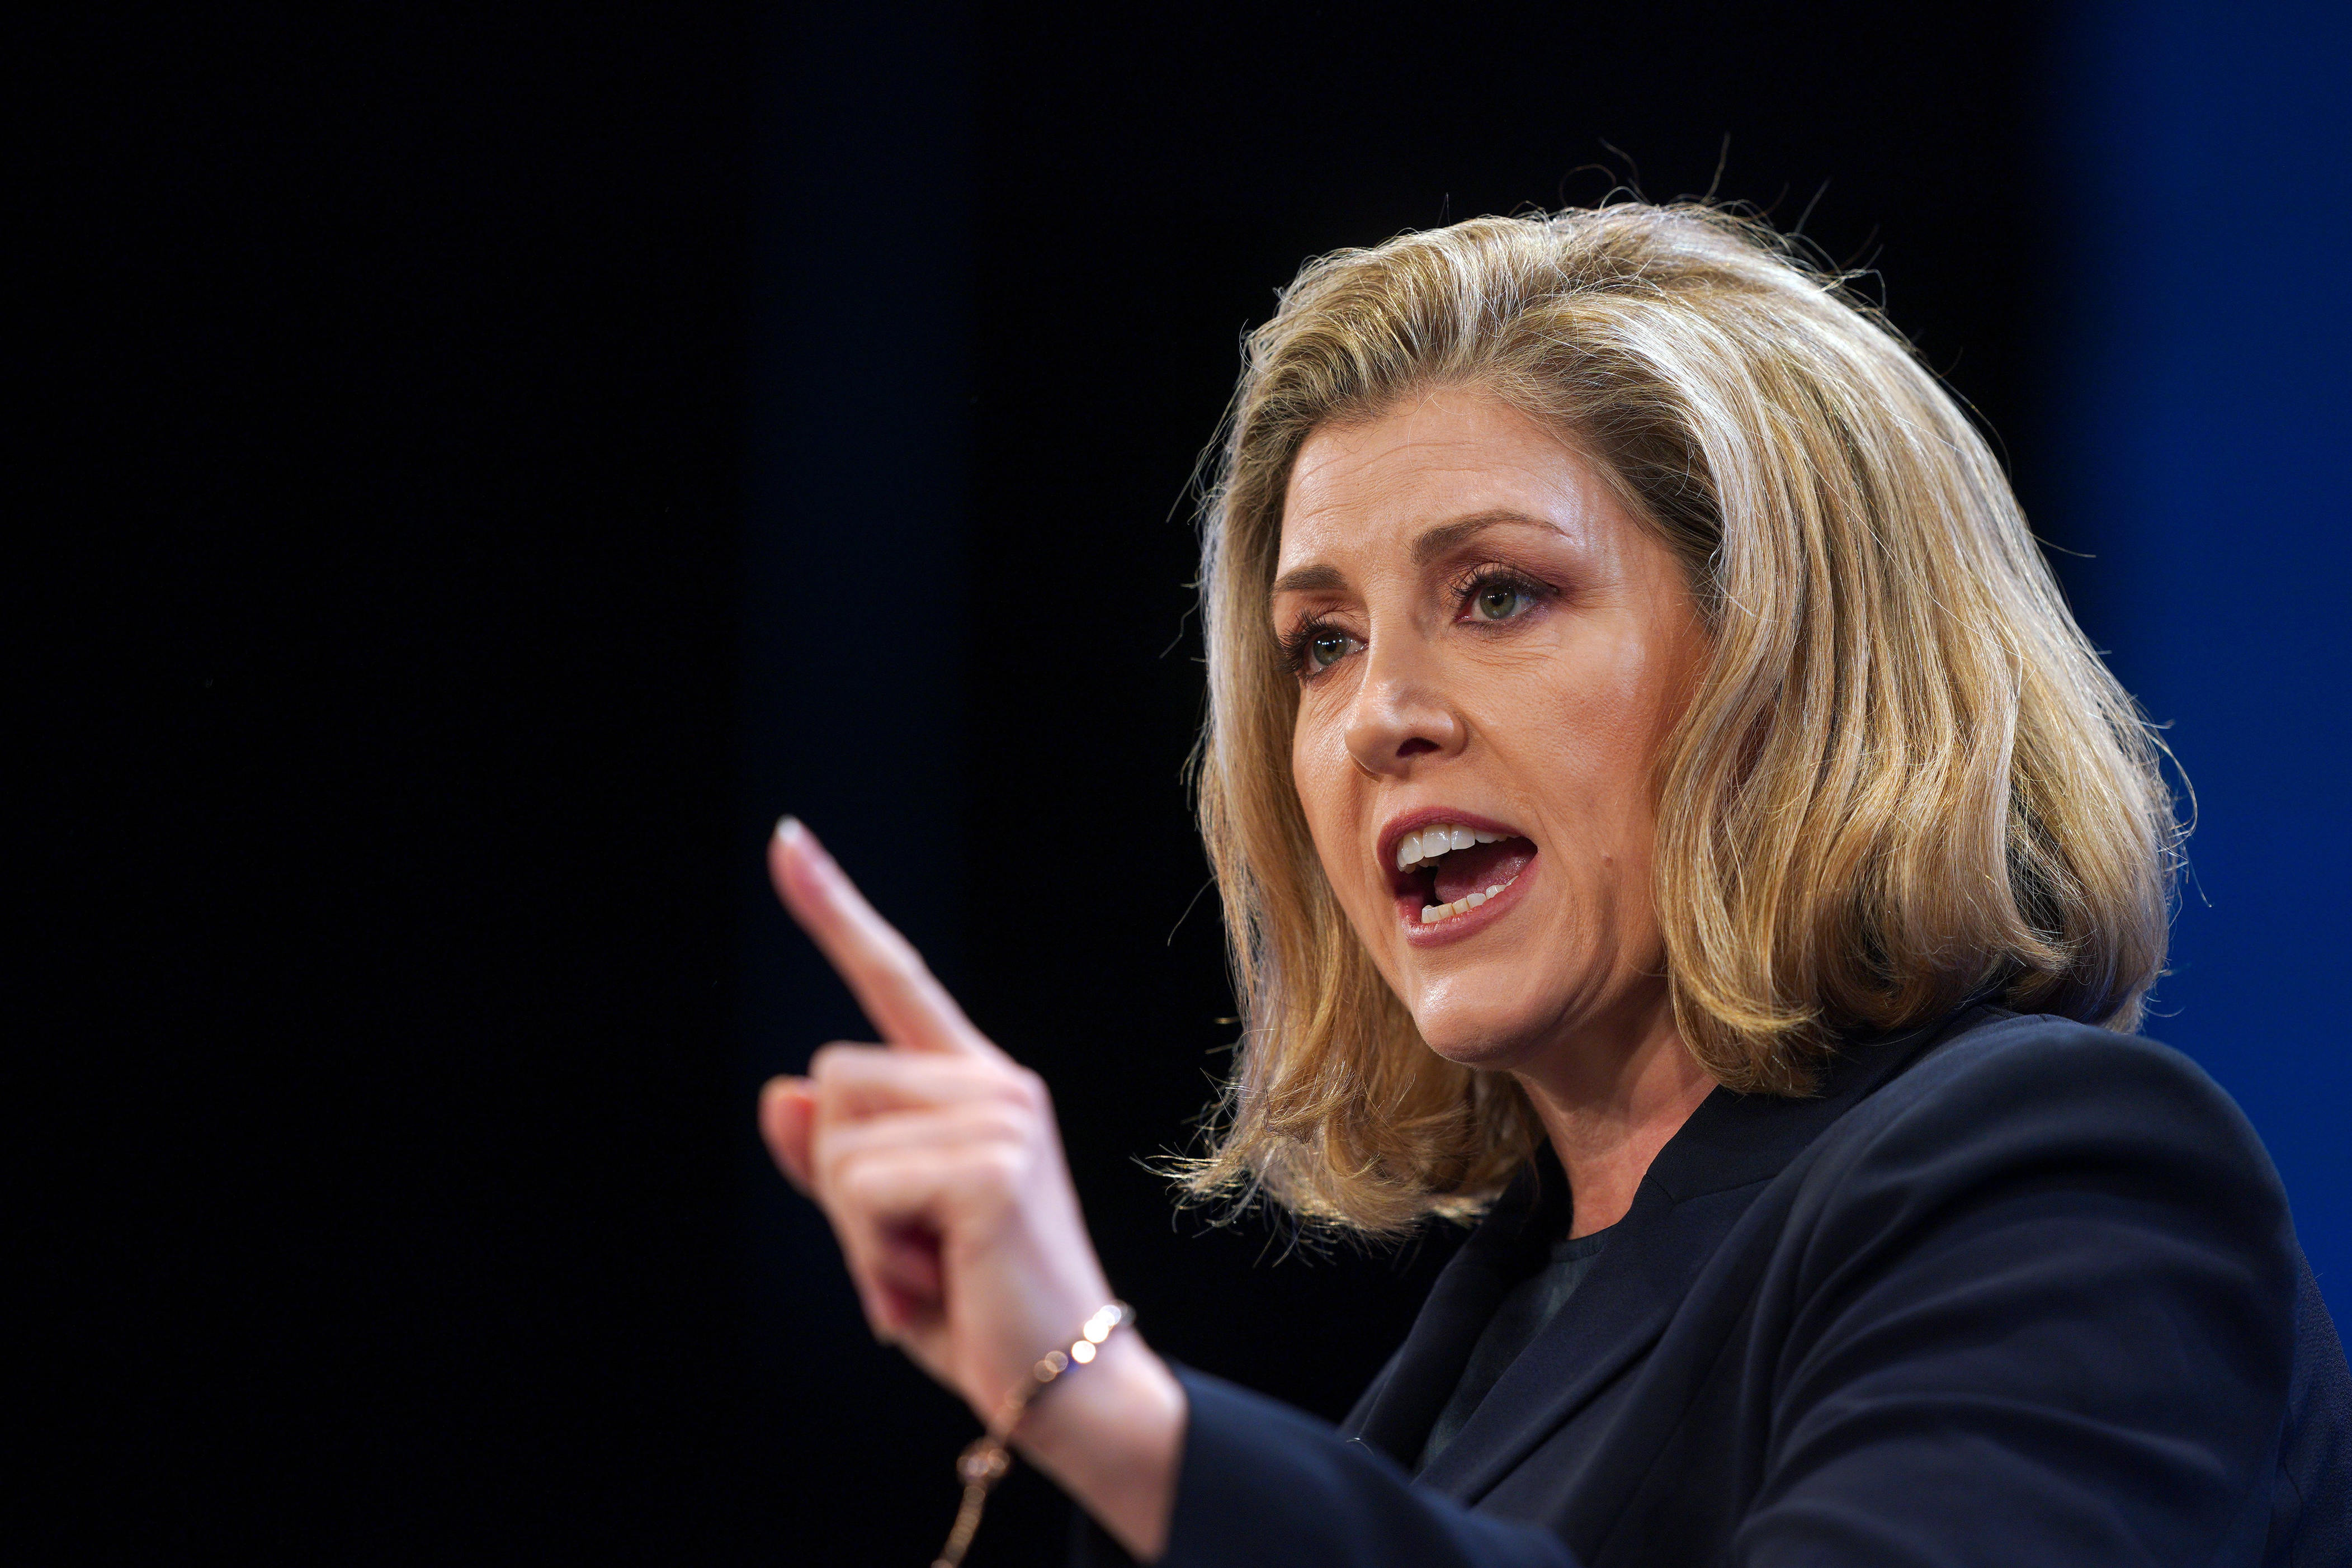 penny mordaunt takes aim at sunak over trans row